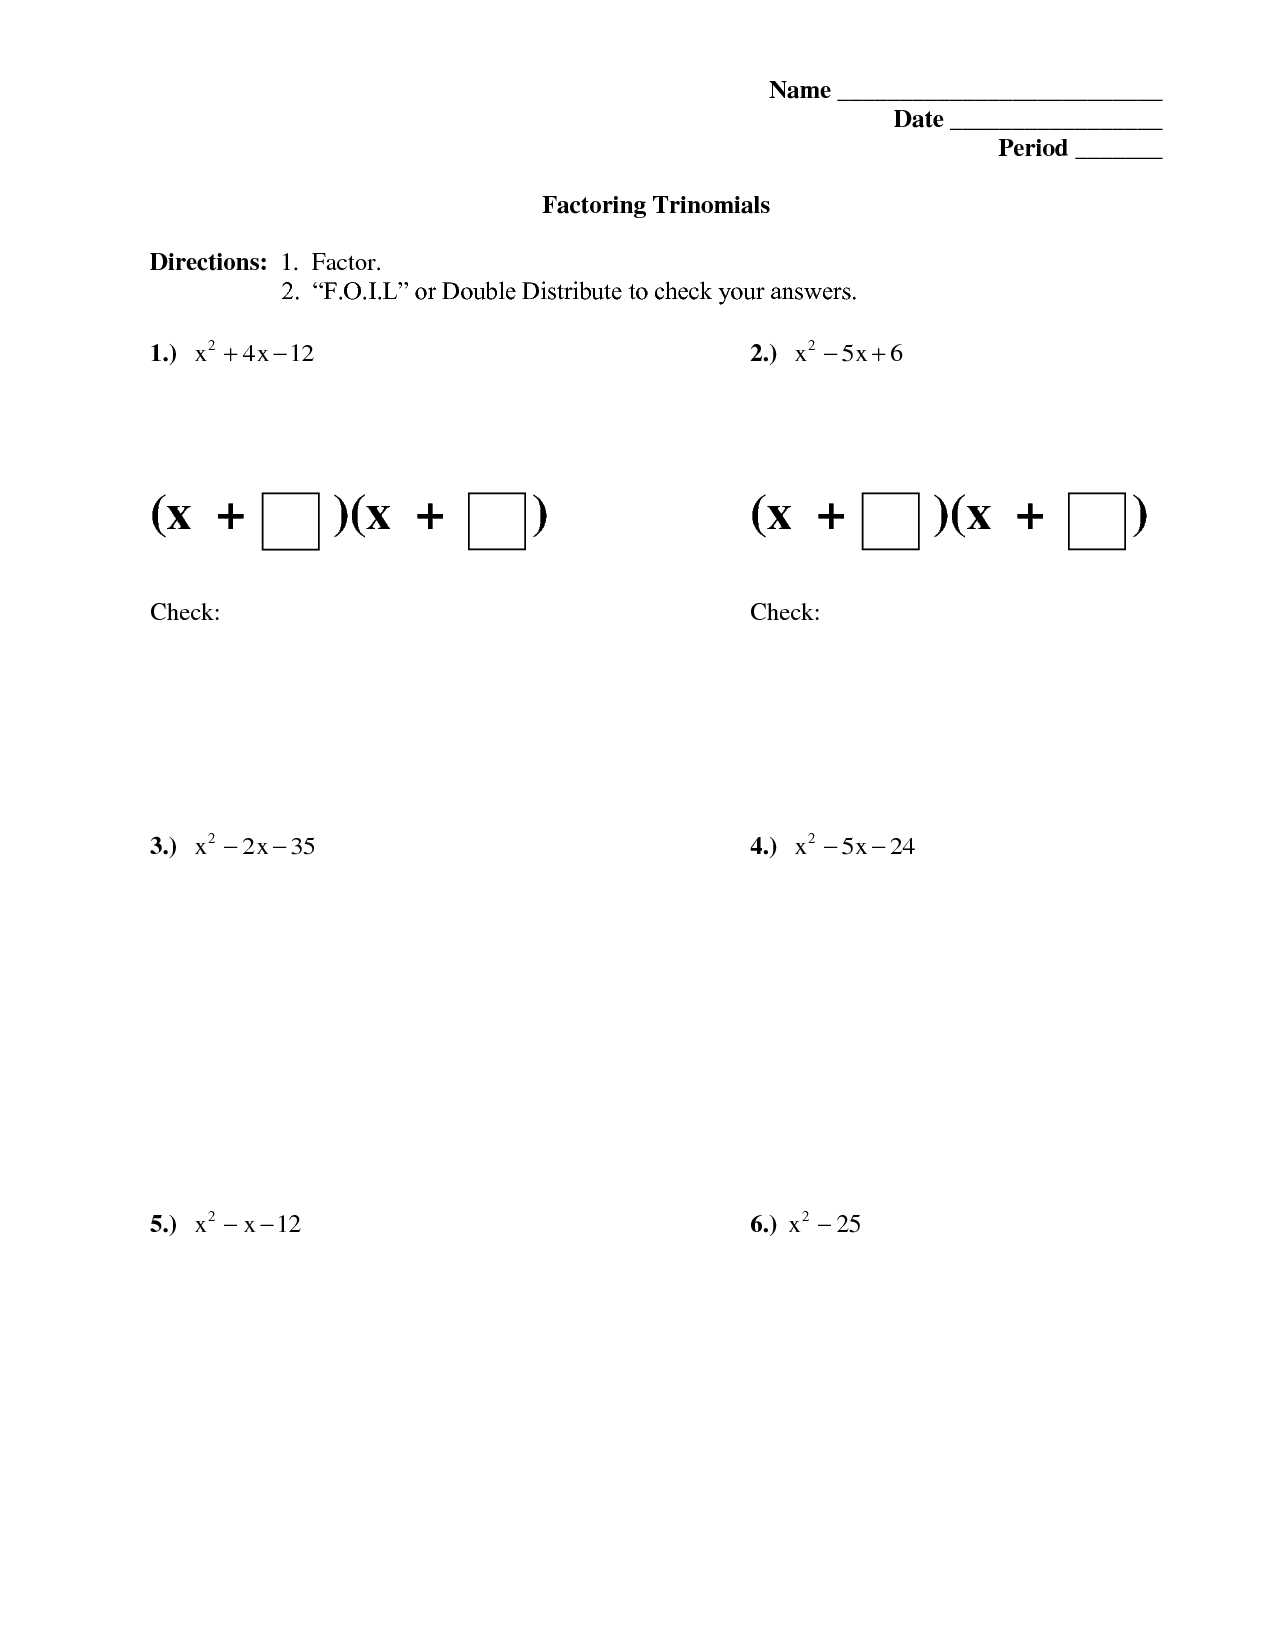 Factor Each Completely Worksheet Answers together with Factoring Quadratics Homework Sheet